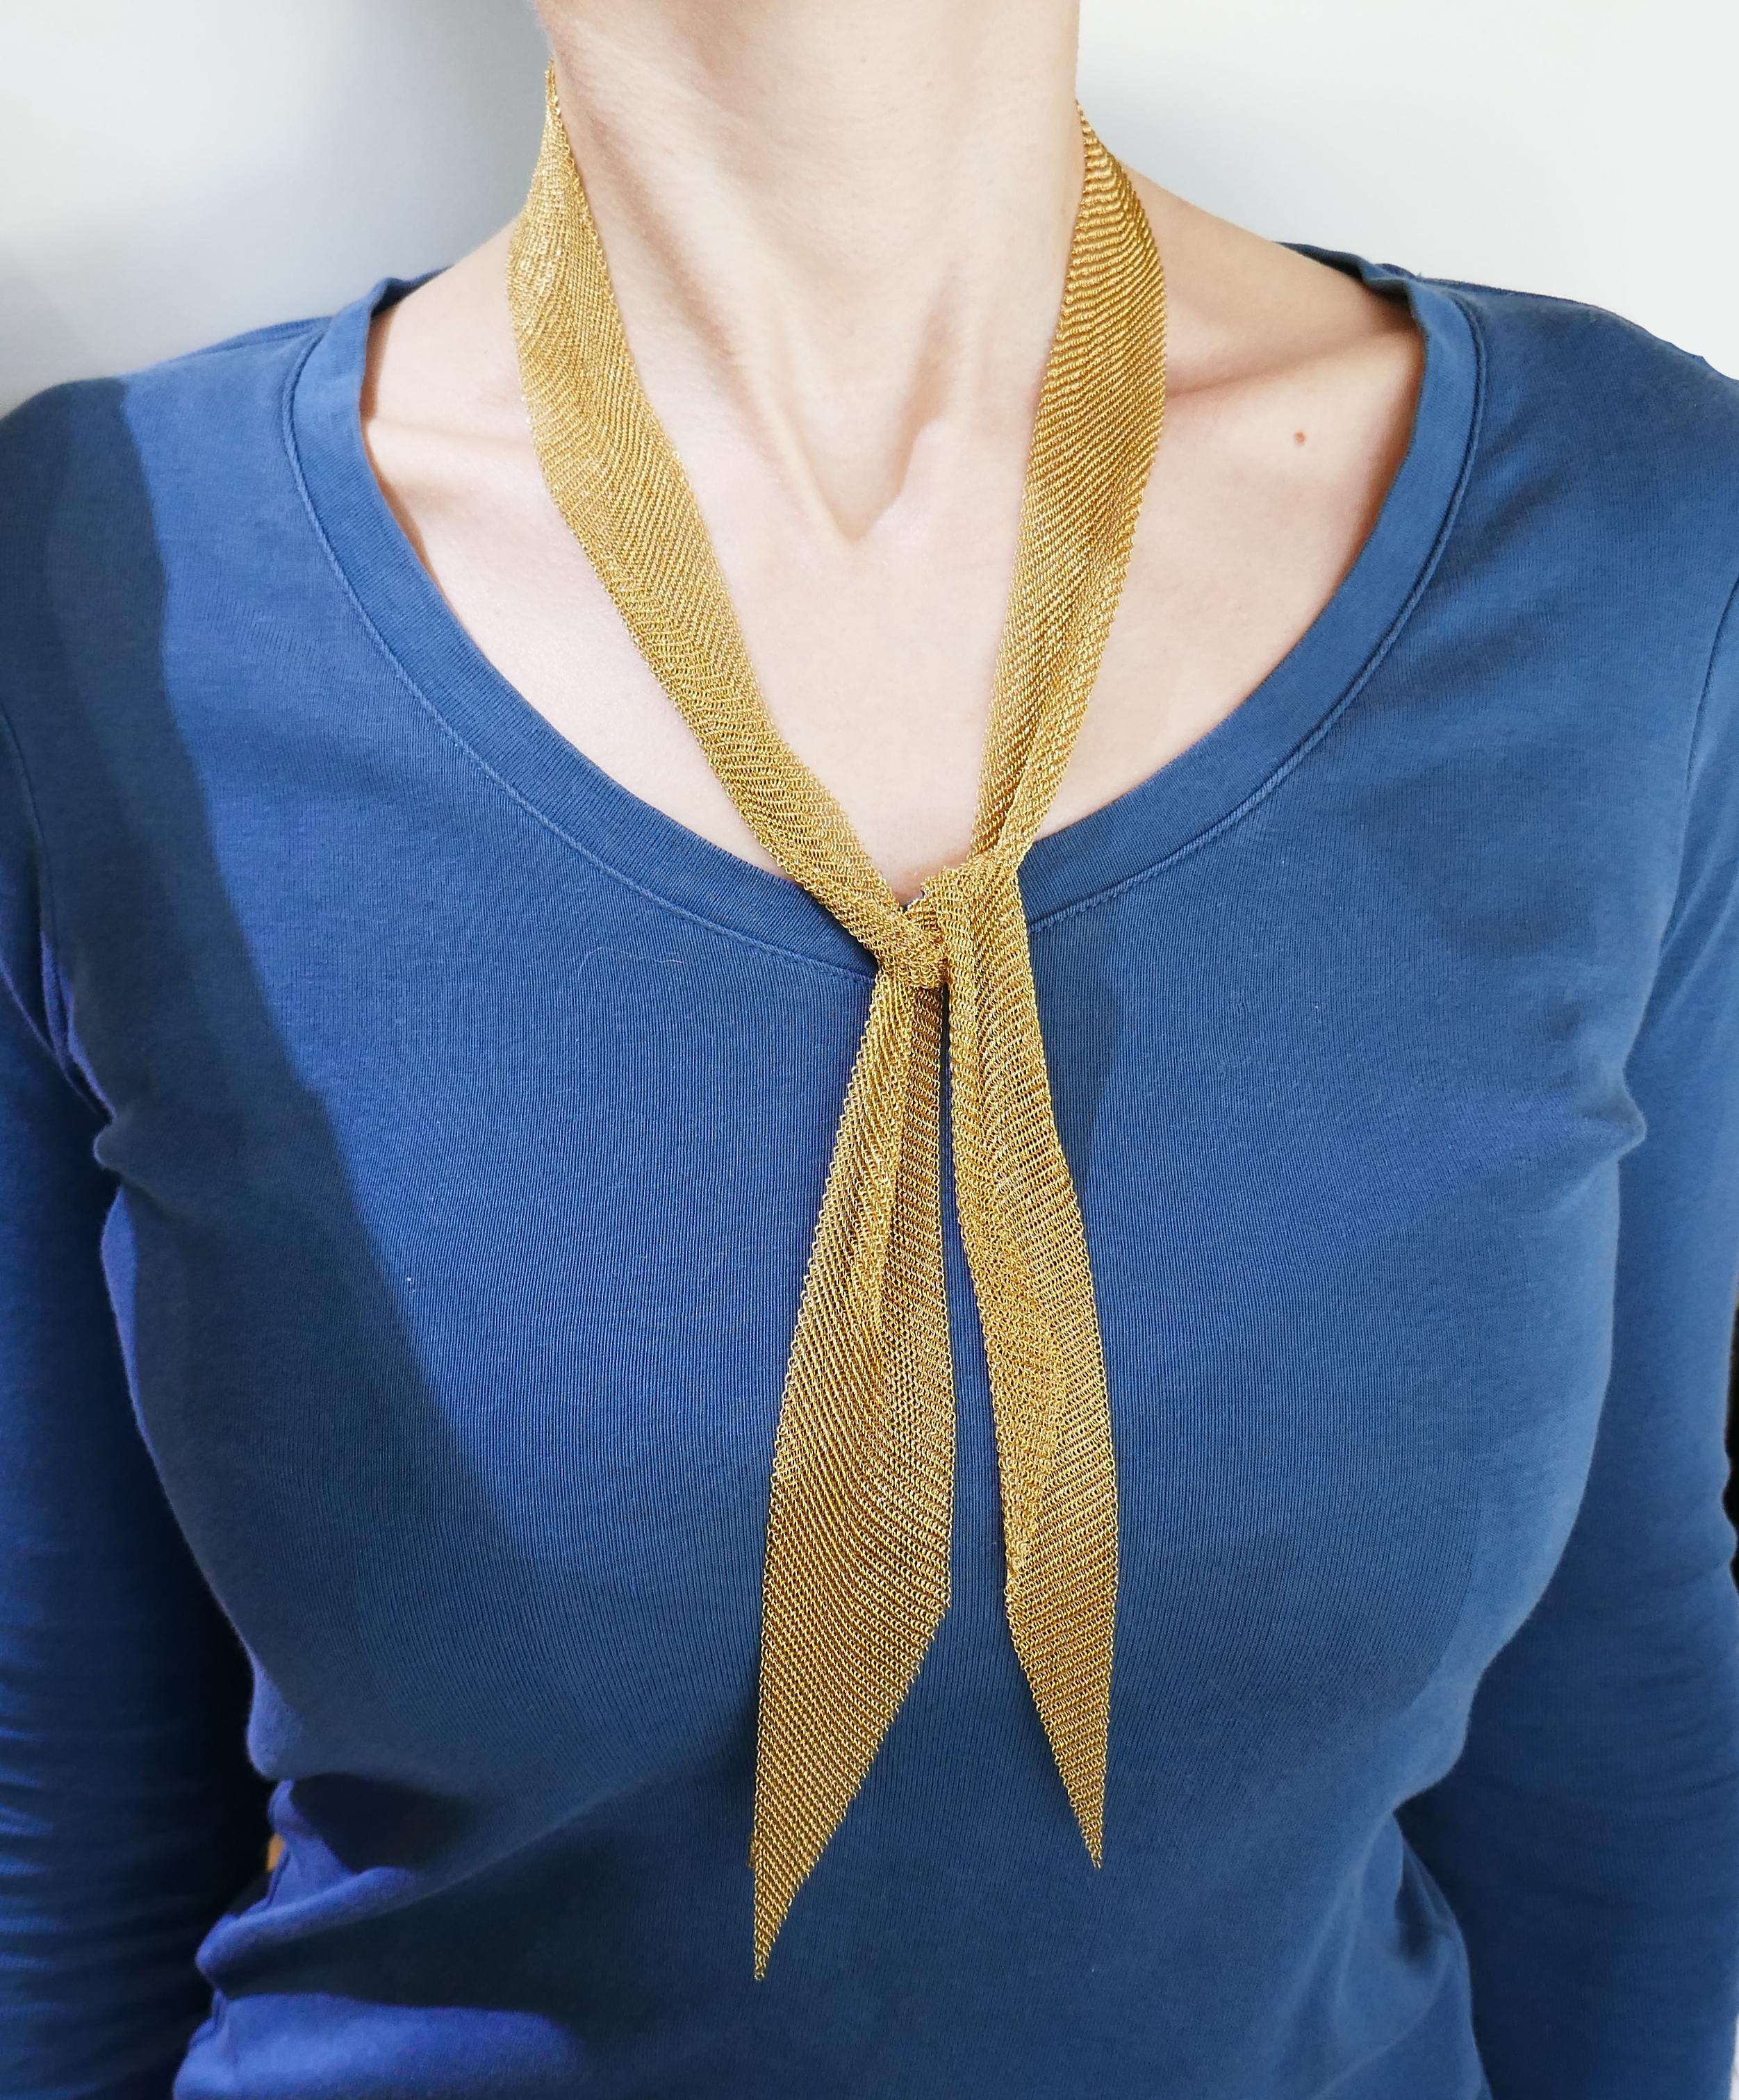 Signature mesh scarf necklace created by Elsa Peretti for Tiffany & Co. Elegant, smooth and wearable, the necklace is a great addition to your jewelry collection. 
The necklace is made of 18 karat yellow gold. 
It measures 37.5 x 2 inches (95 x 5